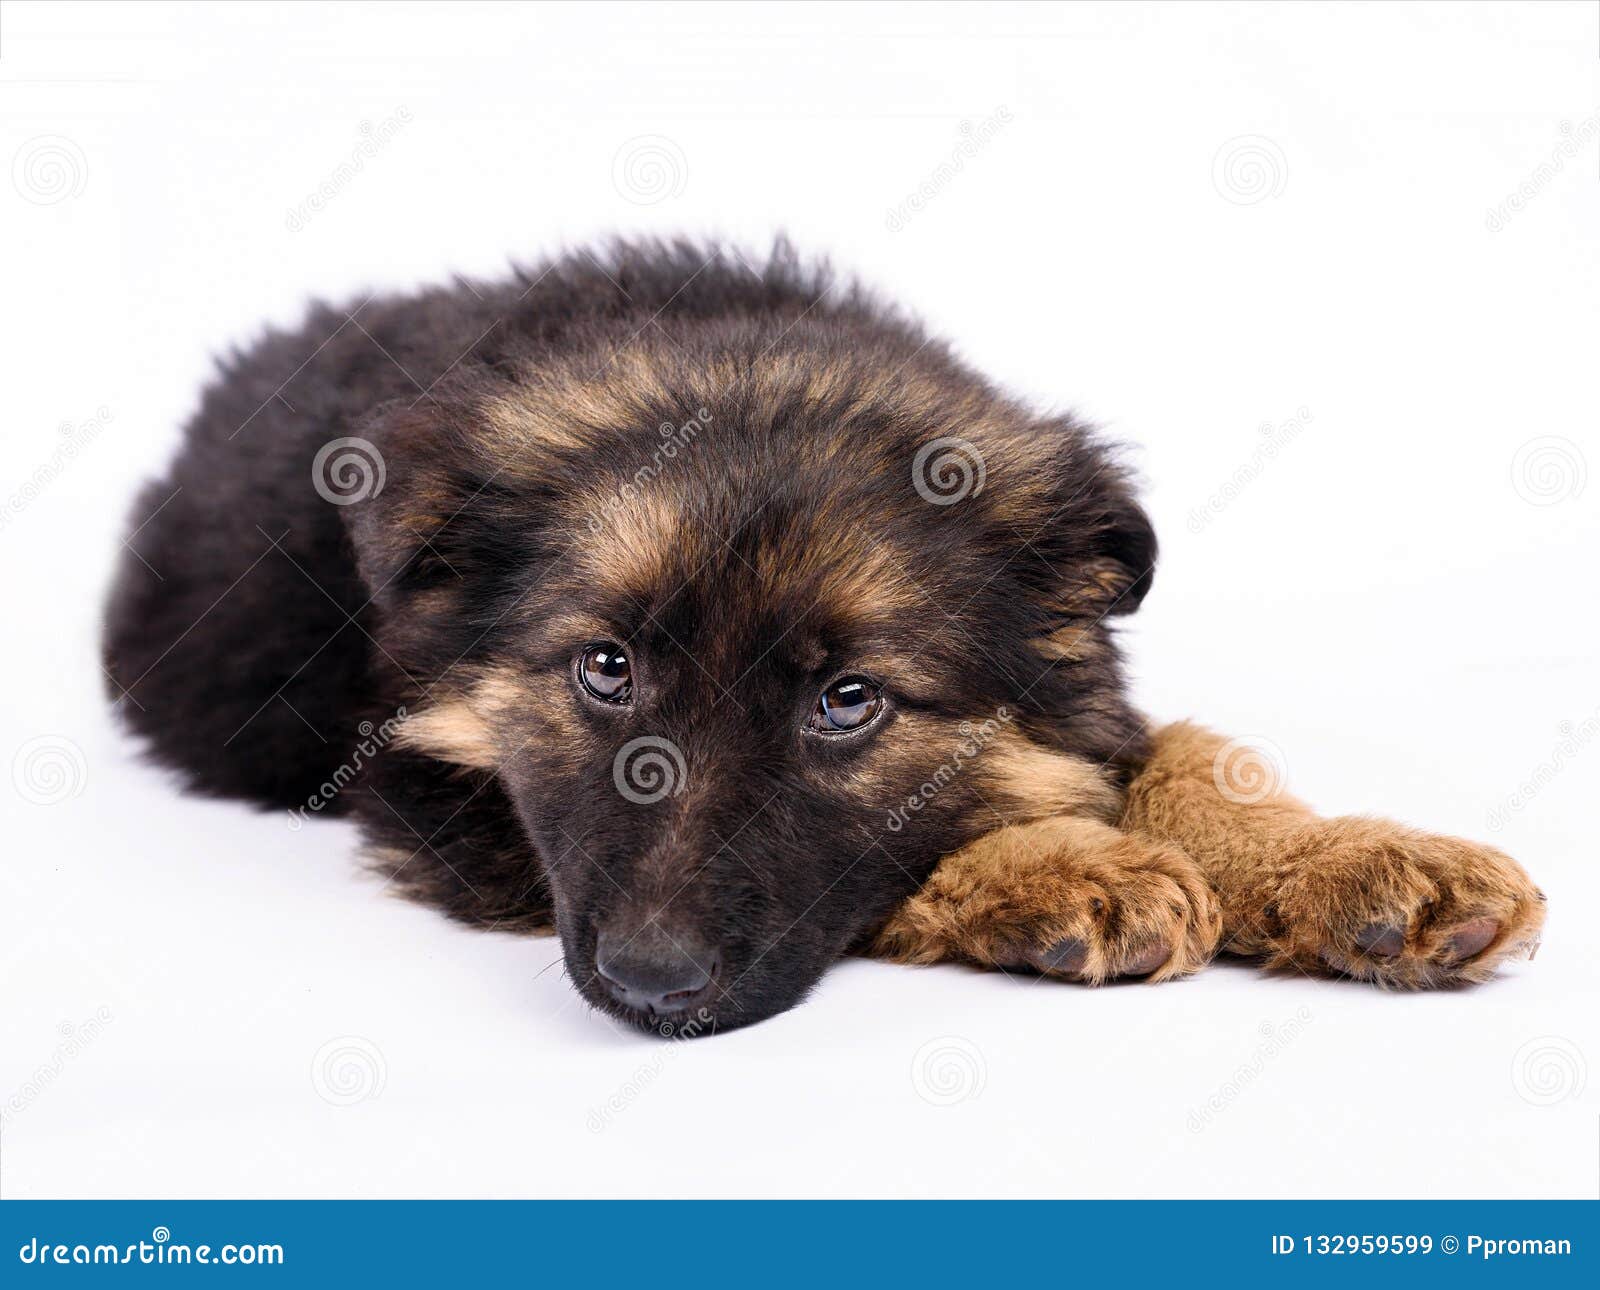 Be Bored One German Shepherd Puppy On A White Background Stock Image ...